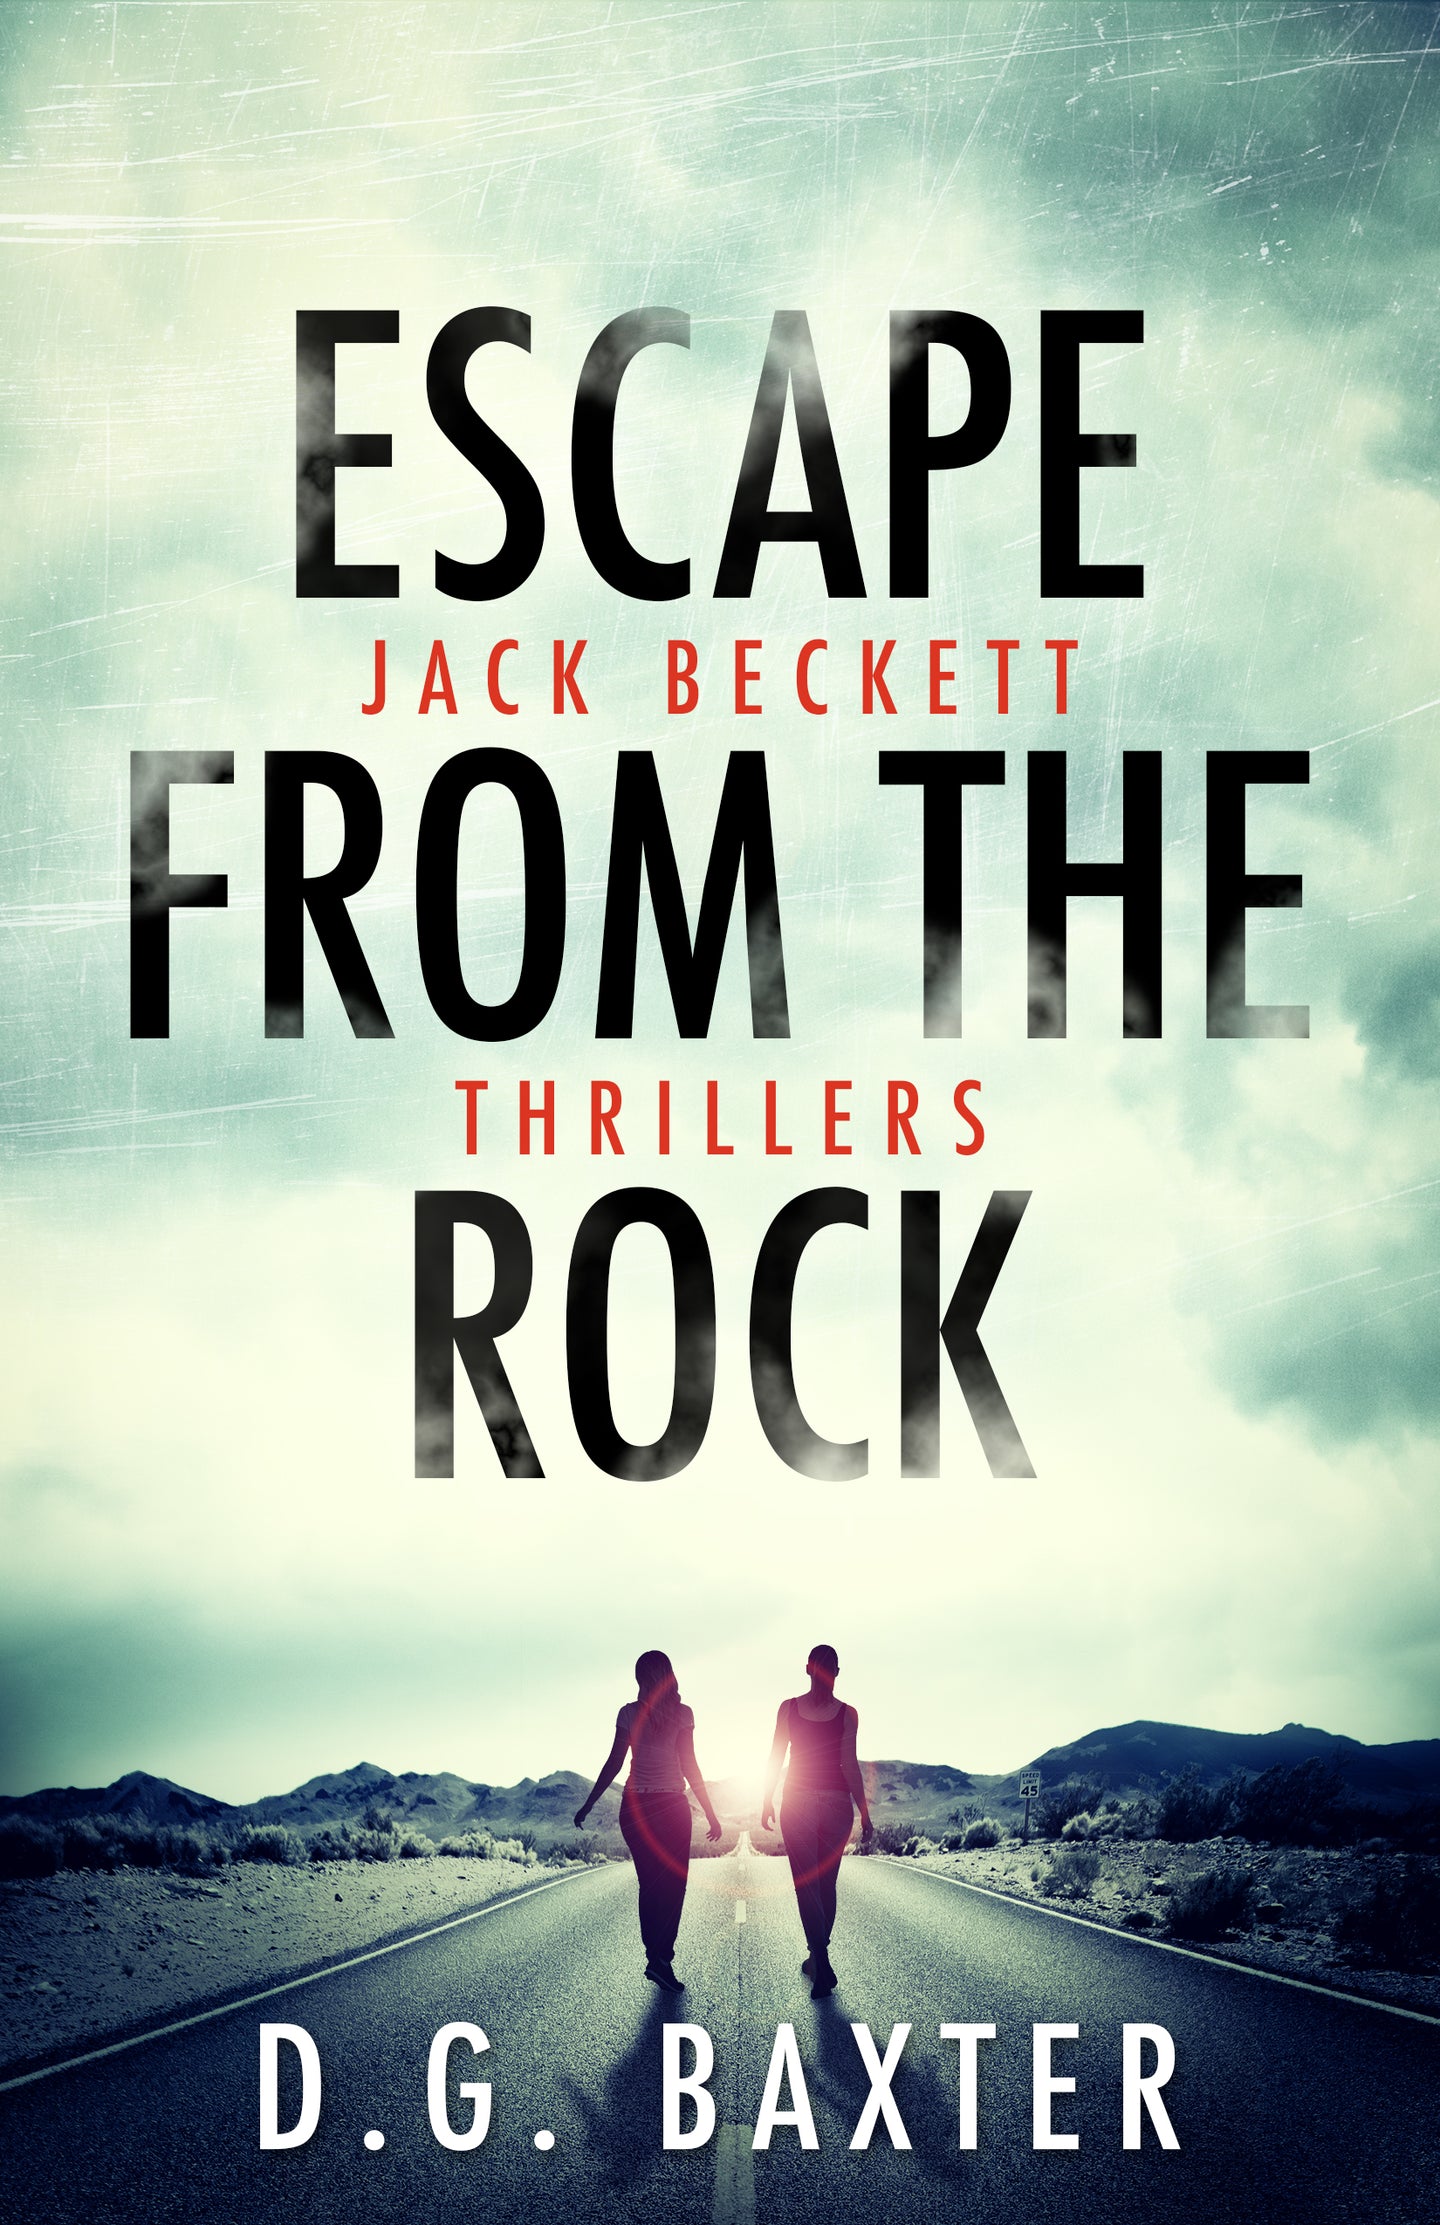 Escape from the Rock (Book One)